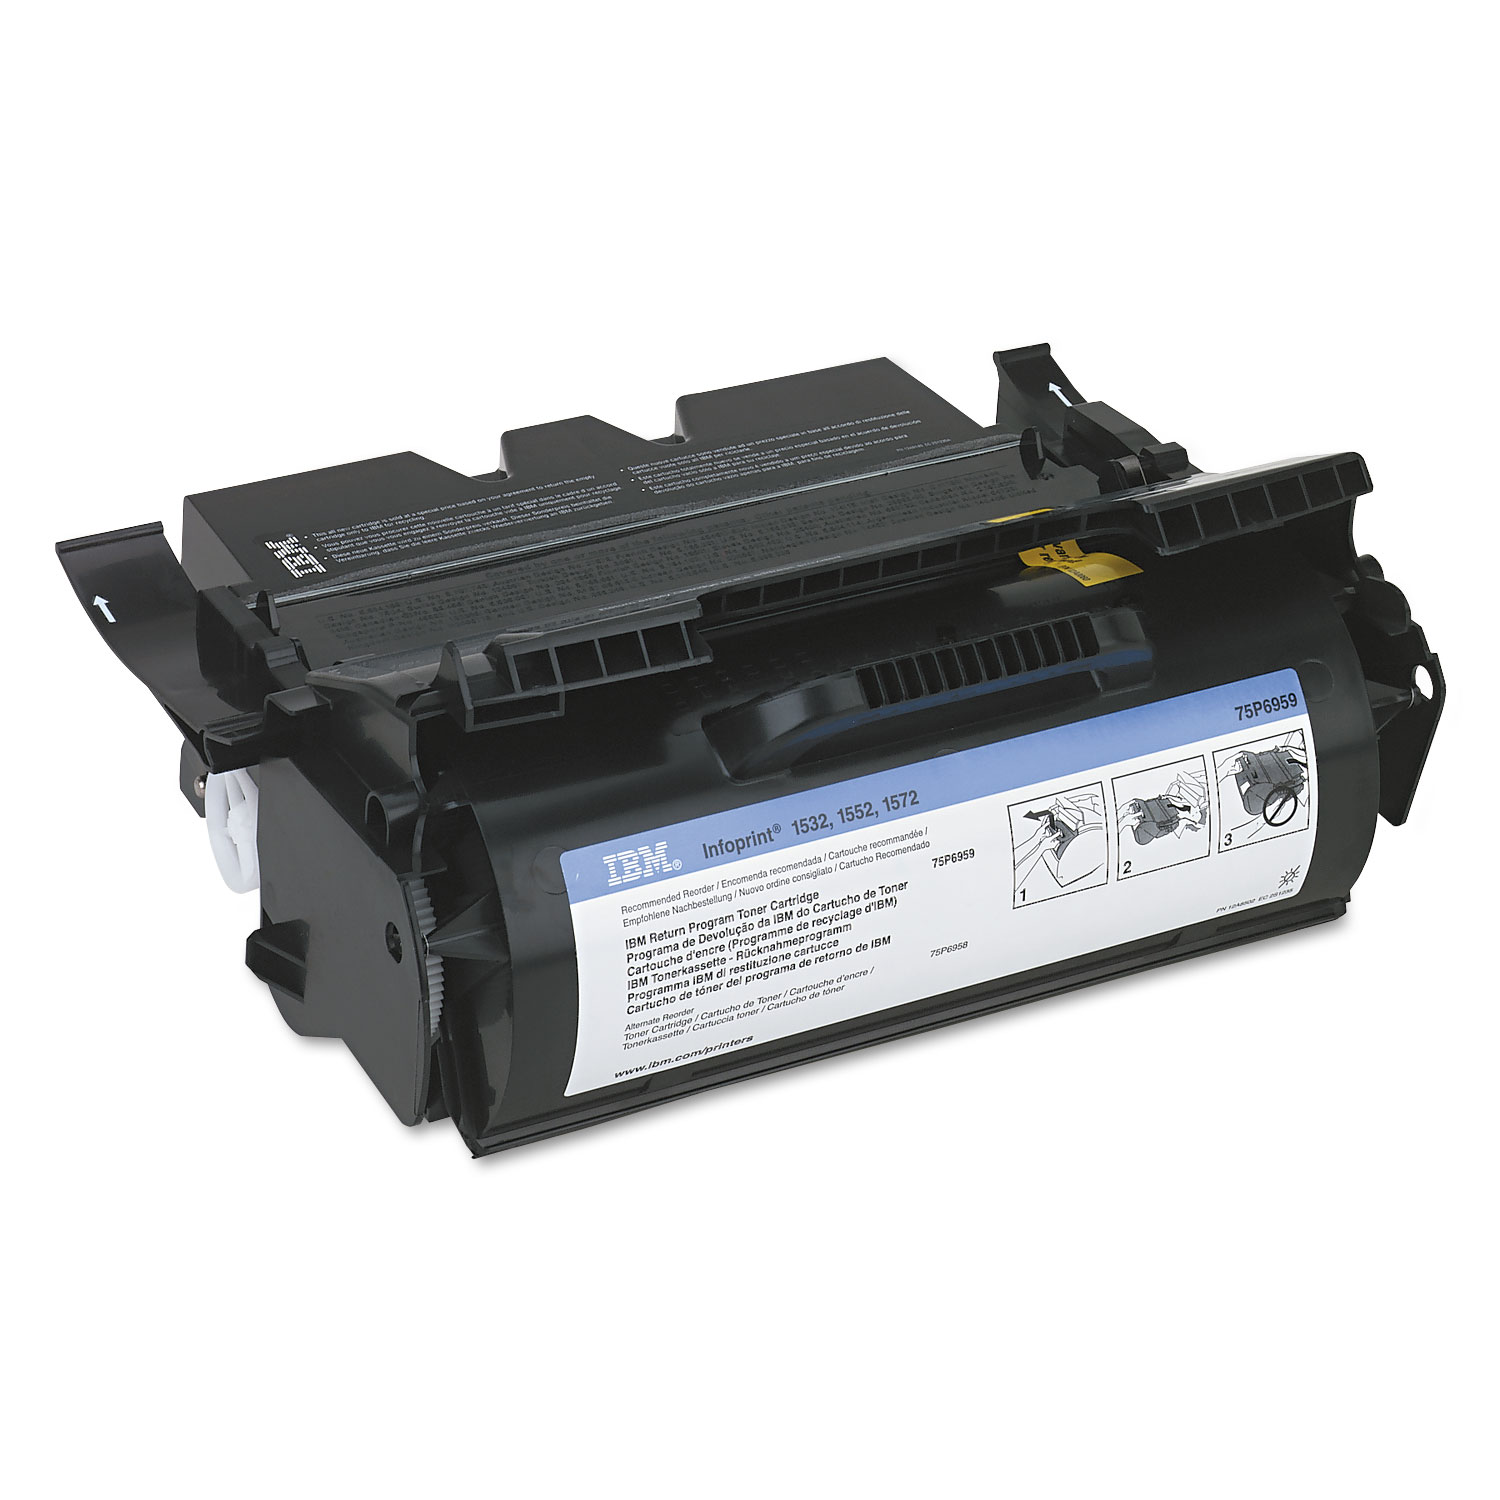  InfoPrint Solutions Company 75P6959 75P6959 Toner, 6000 Page-Yield, Black (IFP75P6959) 